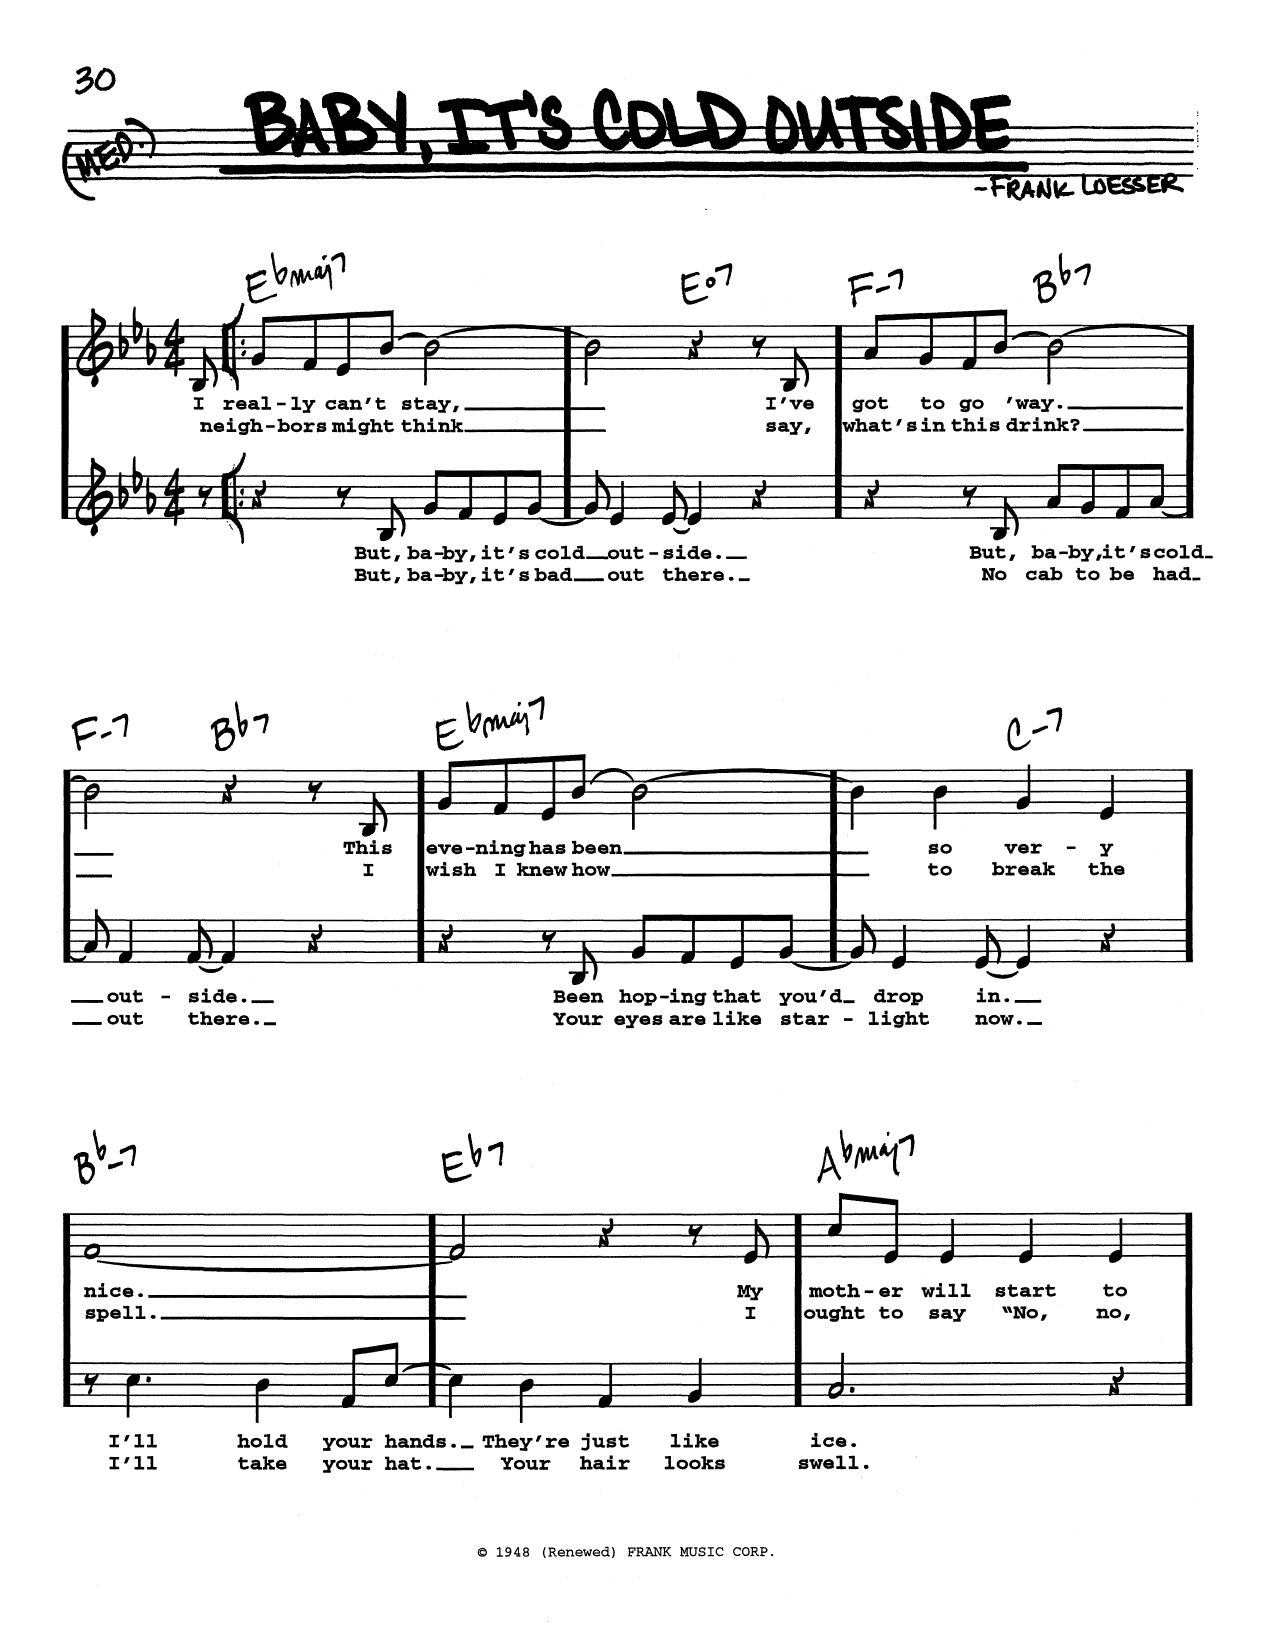 Frank Loesser Baby, It's Cold Outside (Low Voice) sheet music notes printable PDF score